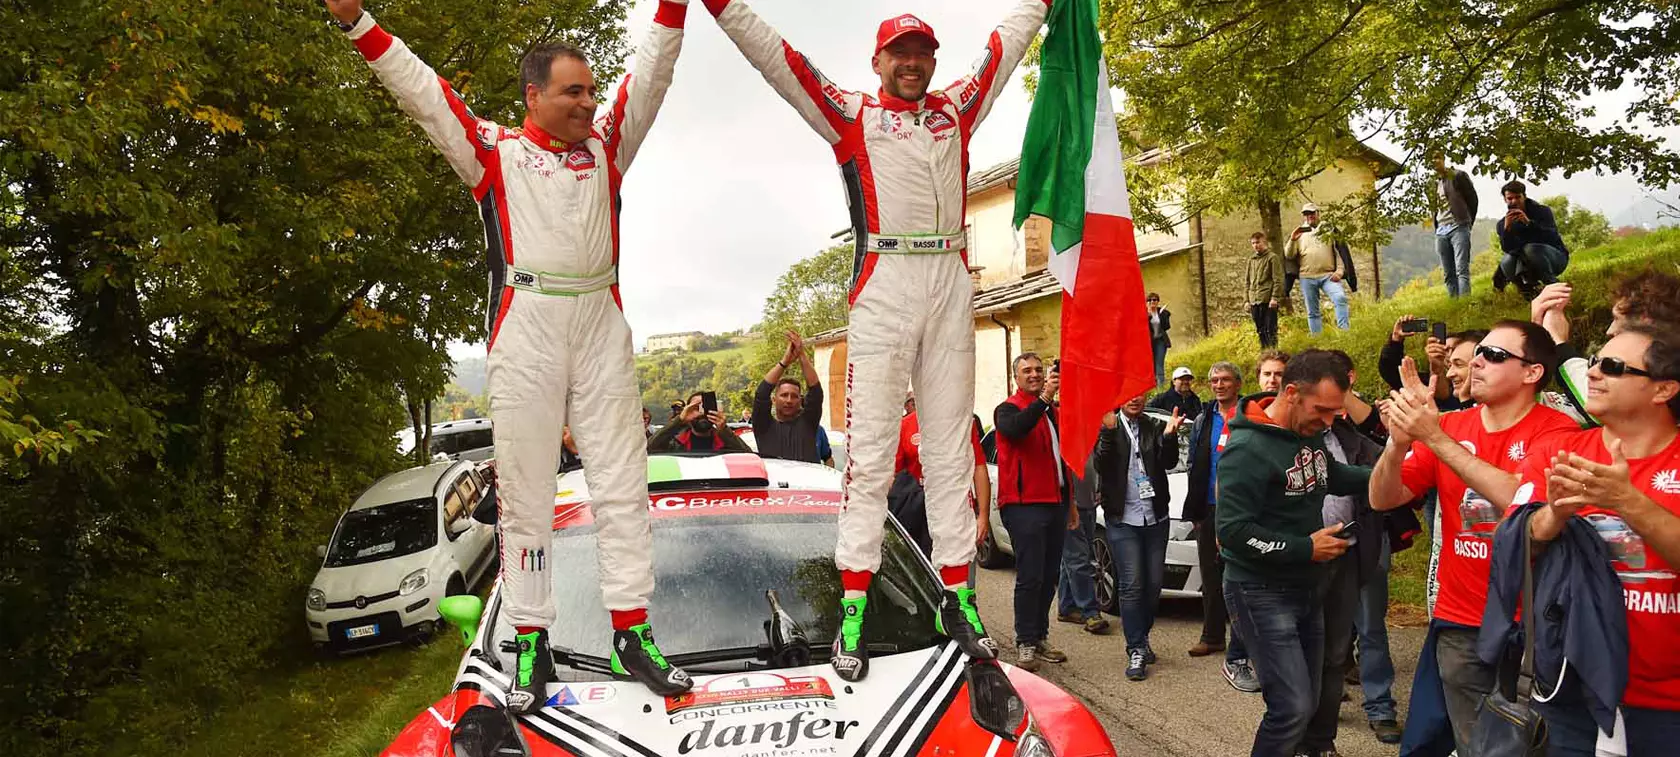 Rally Due Valli 2016 - Basso is champion!